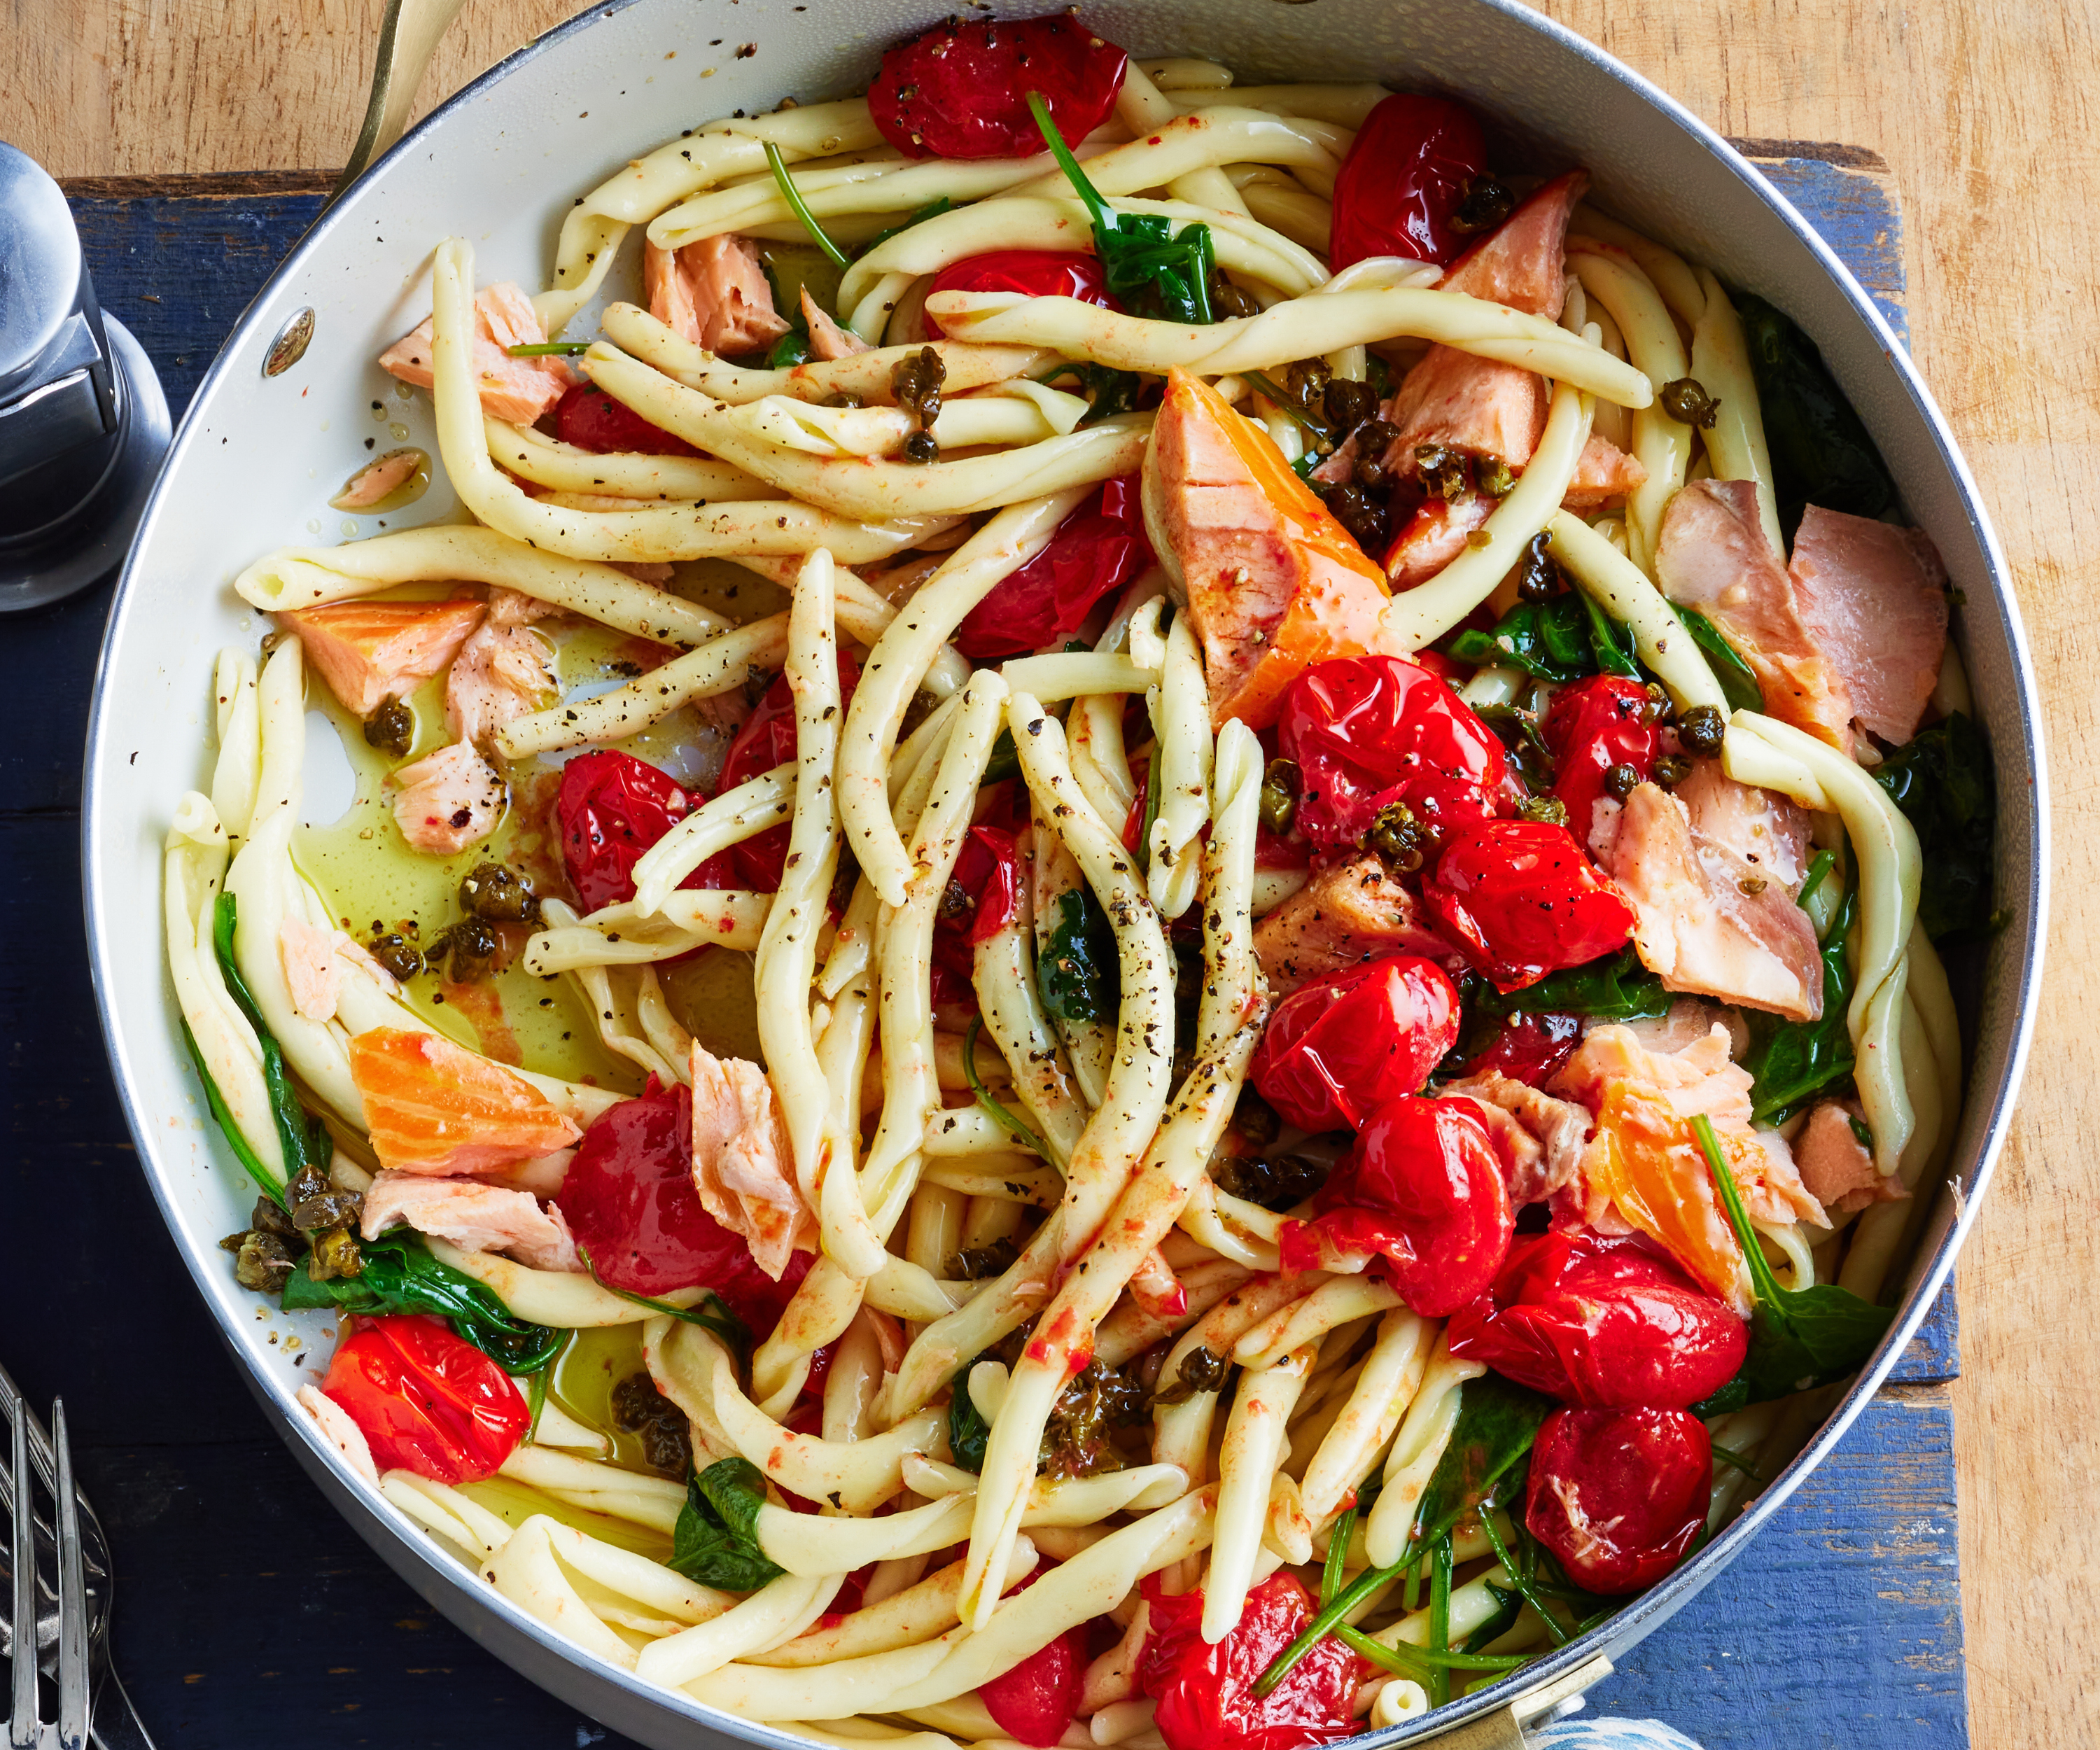 Pan with smoked salmon, pasta, tomatoes and capers.